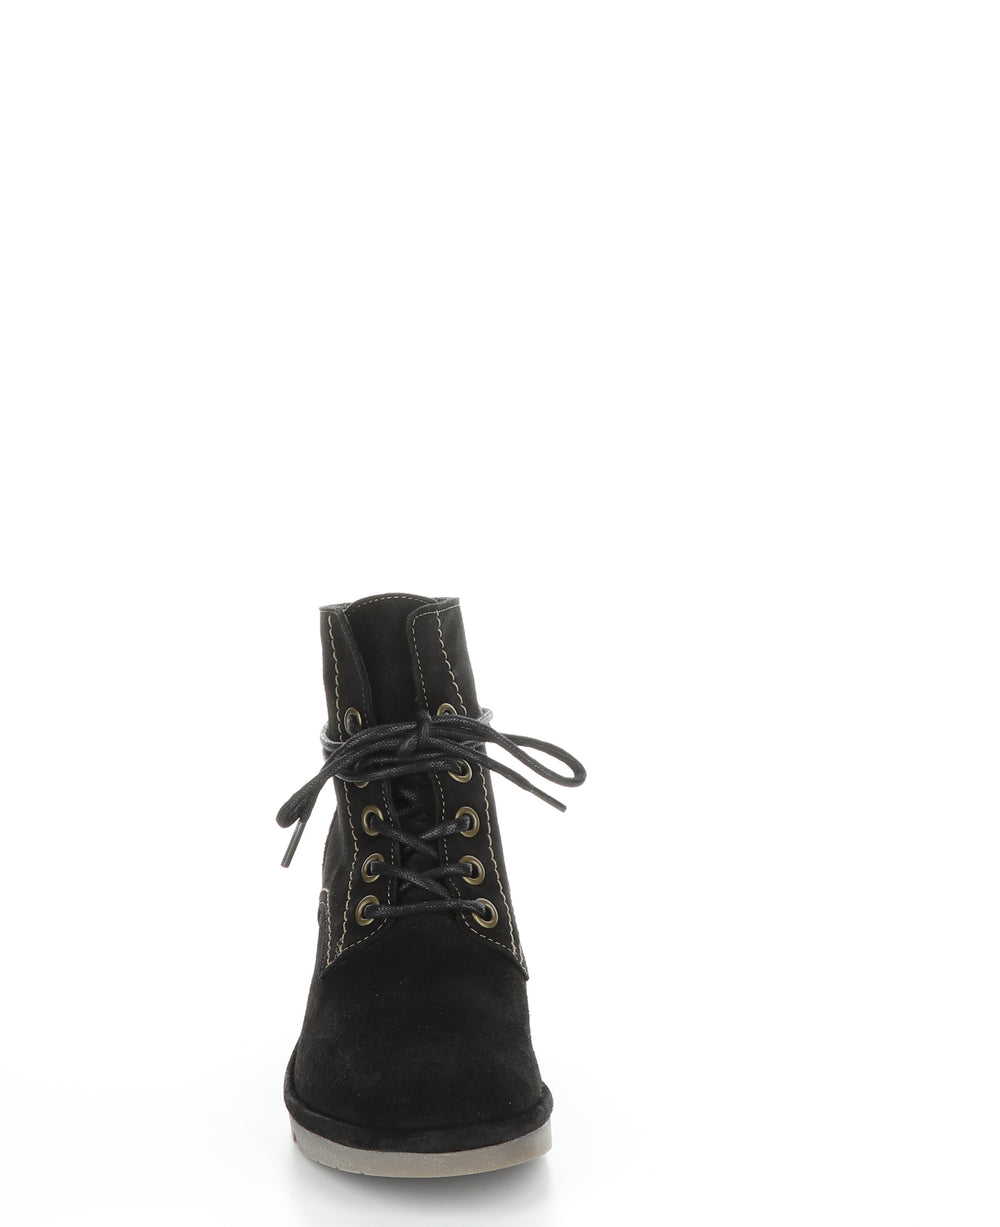 NERO257FLY Black Round Toe Ankle Boots|NERO257FLY Bottines à Bout Rond in Noir